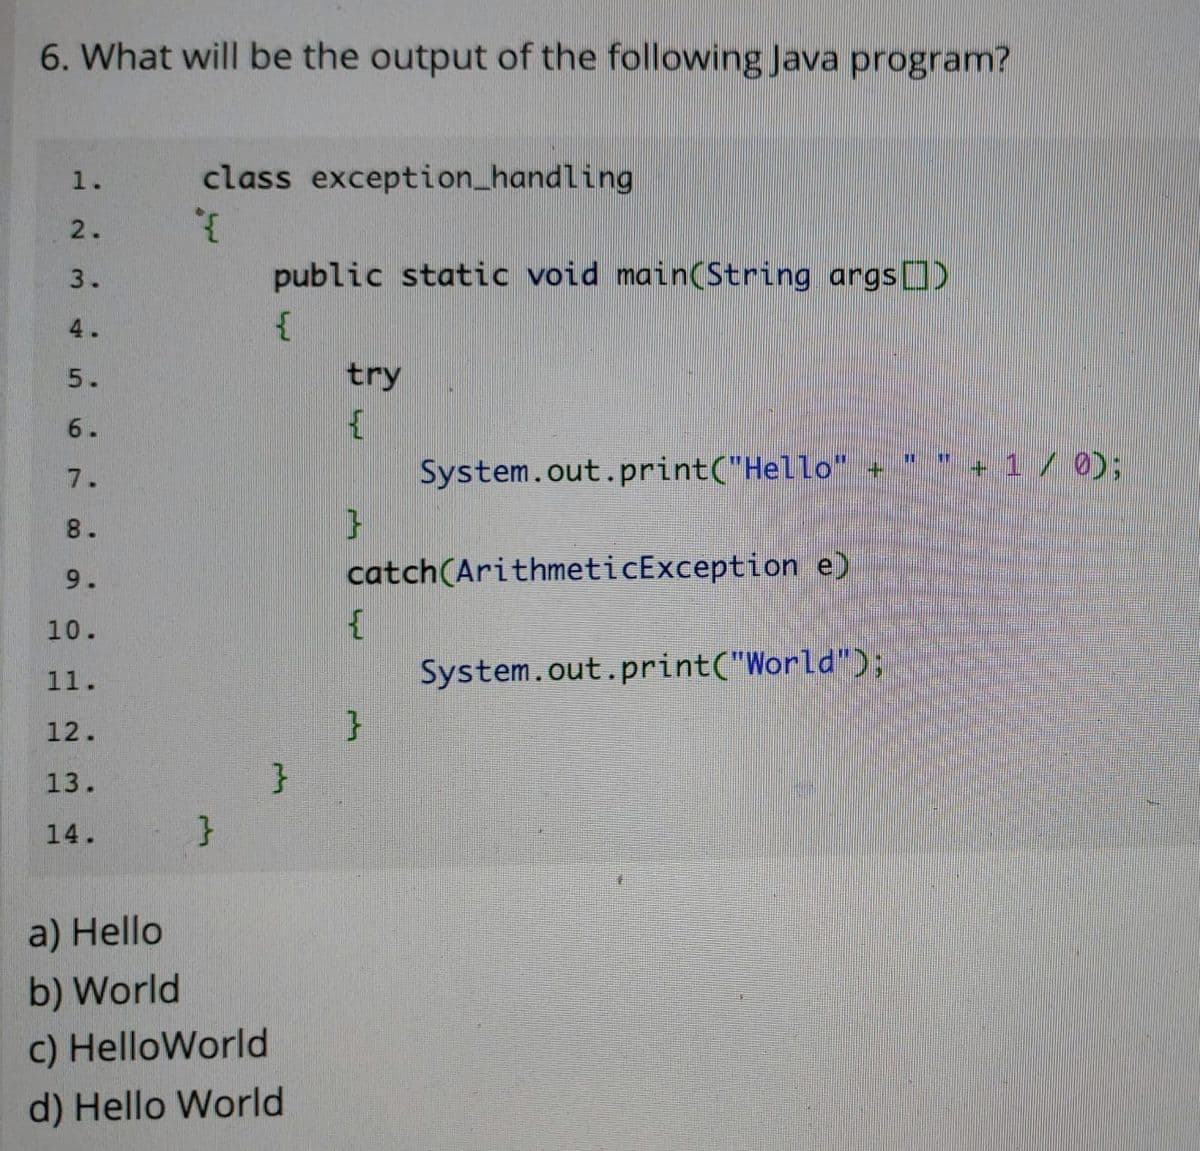 6. What will be the output of the following Java program?
1.
class exception_handling
2.
3.
public static void main(String args)
4.
5.
try
6.
System.out.print("Hello" -
*+ 1 / 0);
7.
8.
9.
catch(ArithmeticException e)
10.
11.
System.out.print("World");
12.
13.
14.
}
a) Hello
b) World
c) HelloWorld
d) Hello World
